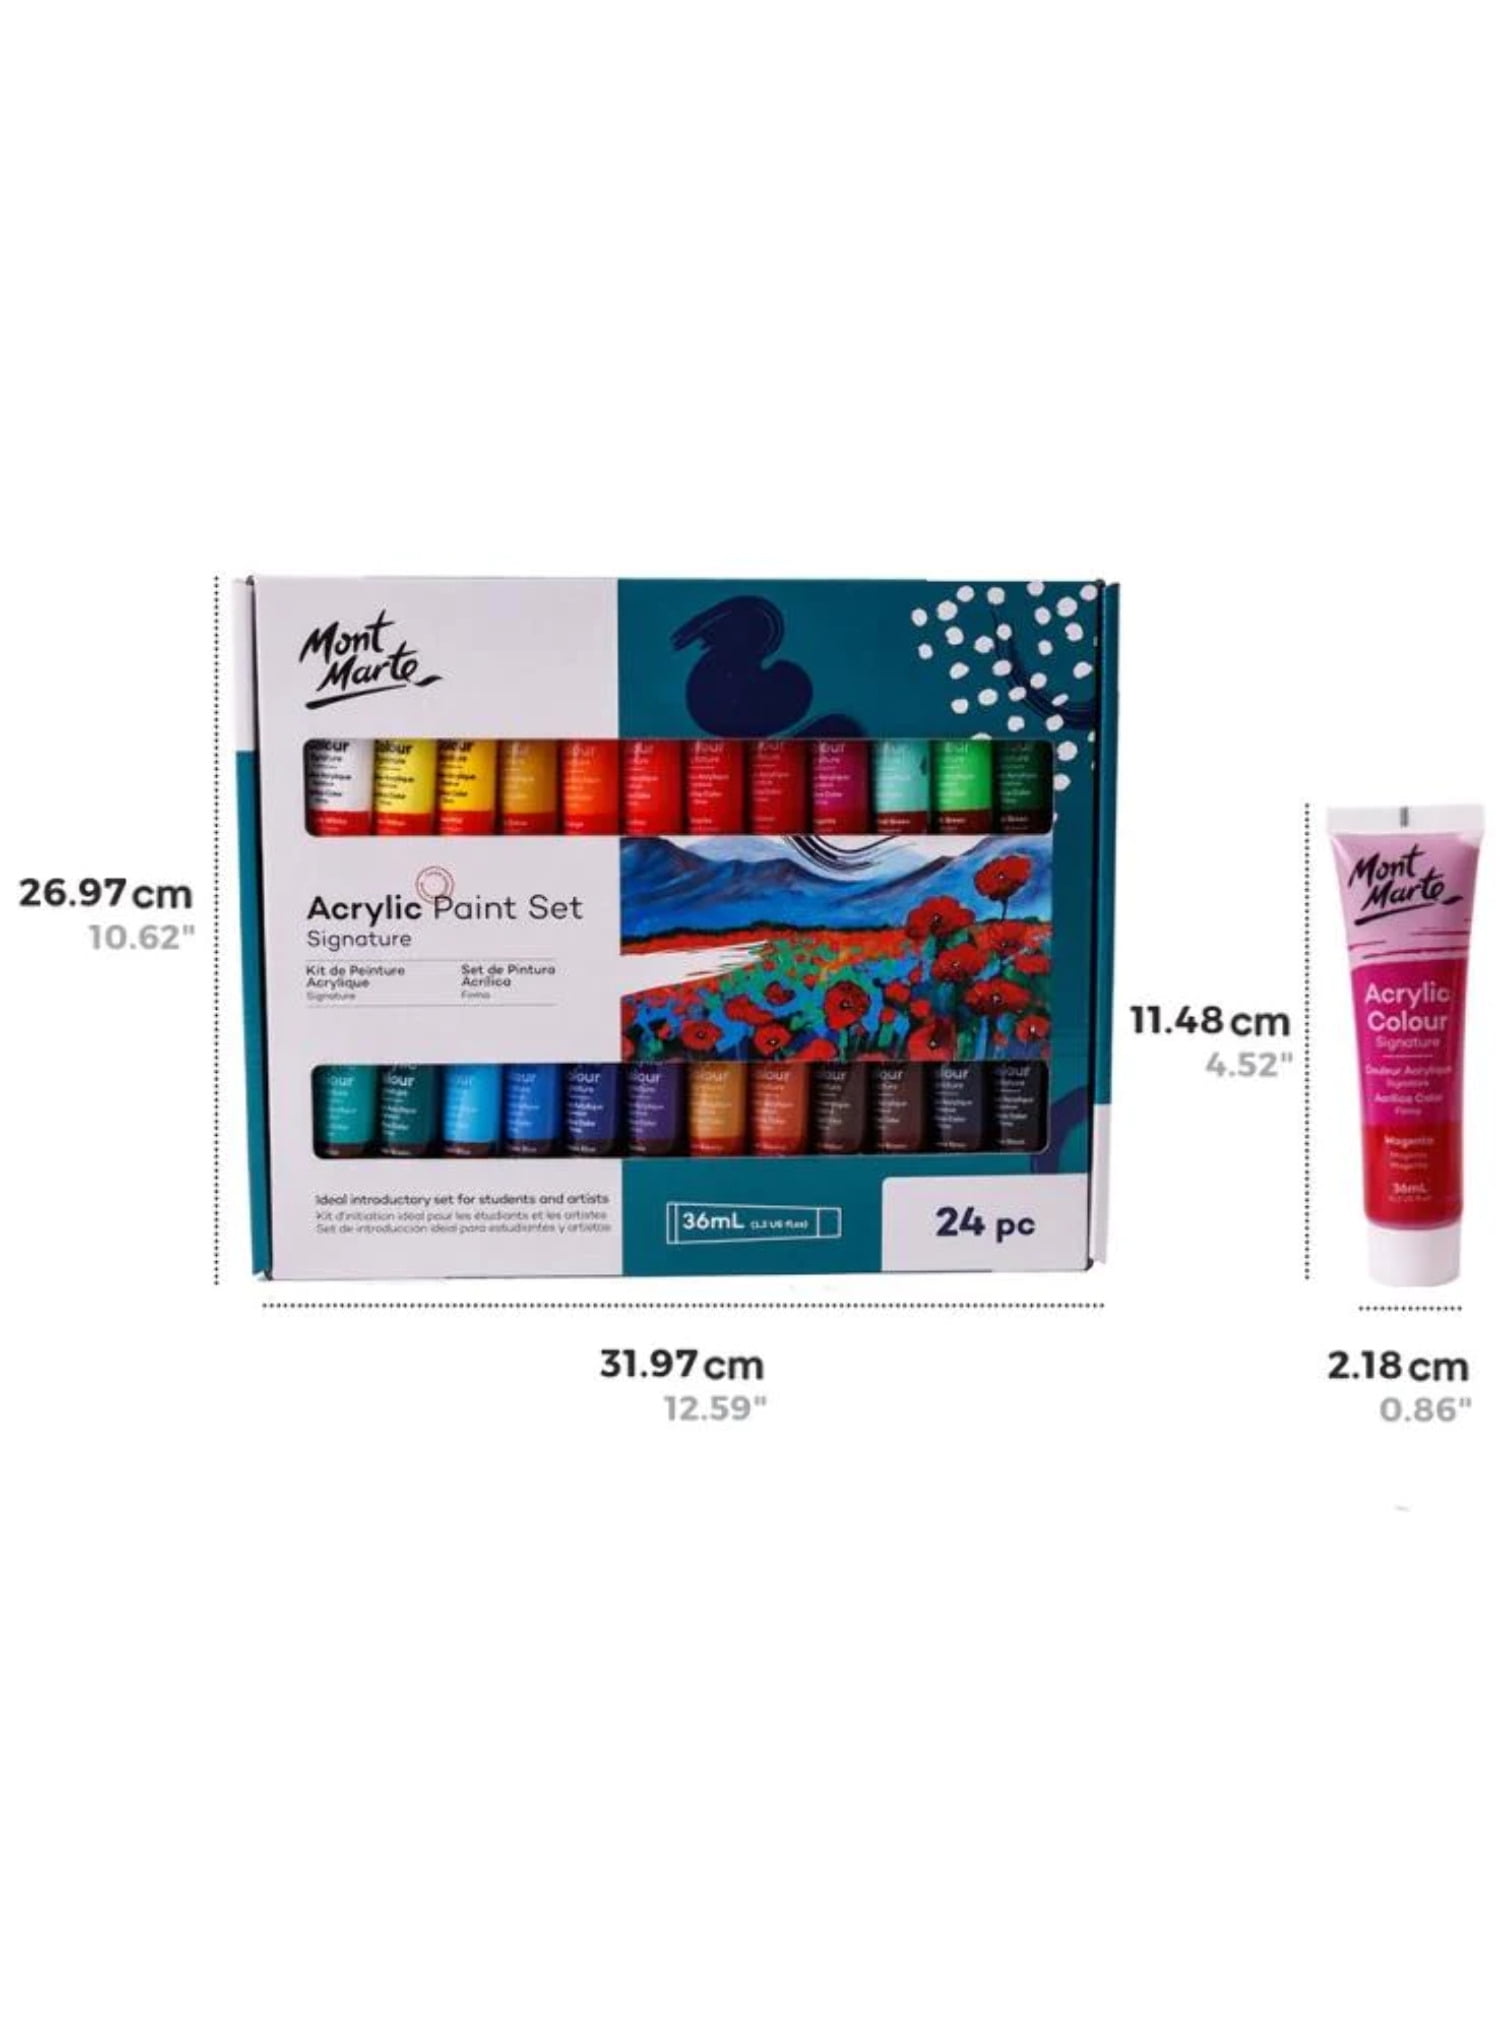 Levin Mont Marte Acrylic Paint Set, 18 Piece, 36ml Tubes.  Lightfast Colours with Great Coverage, Ideal for Canvas, Wood, Fabric,  Leather, Cardboard, Paper, MDF and Crafts. 